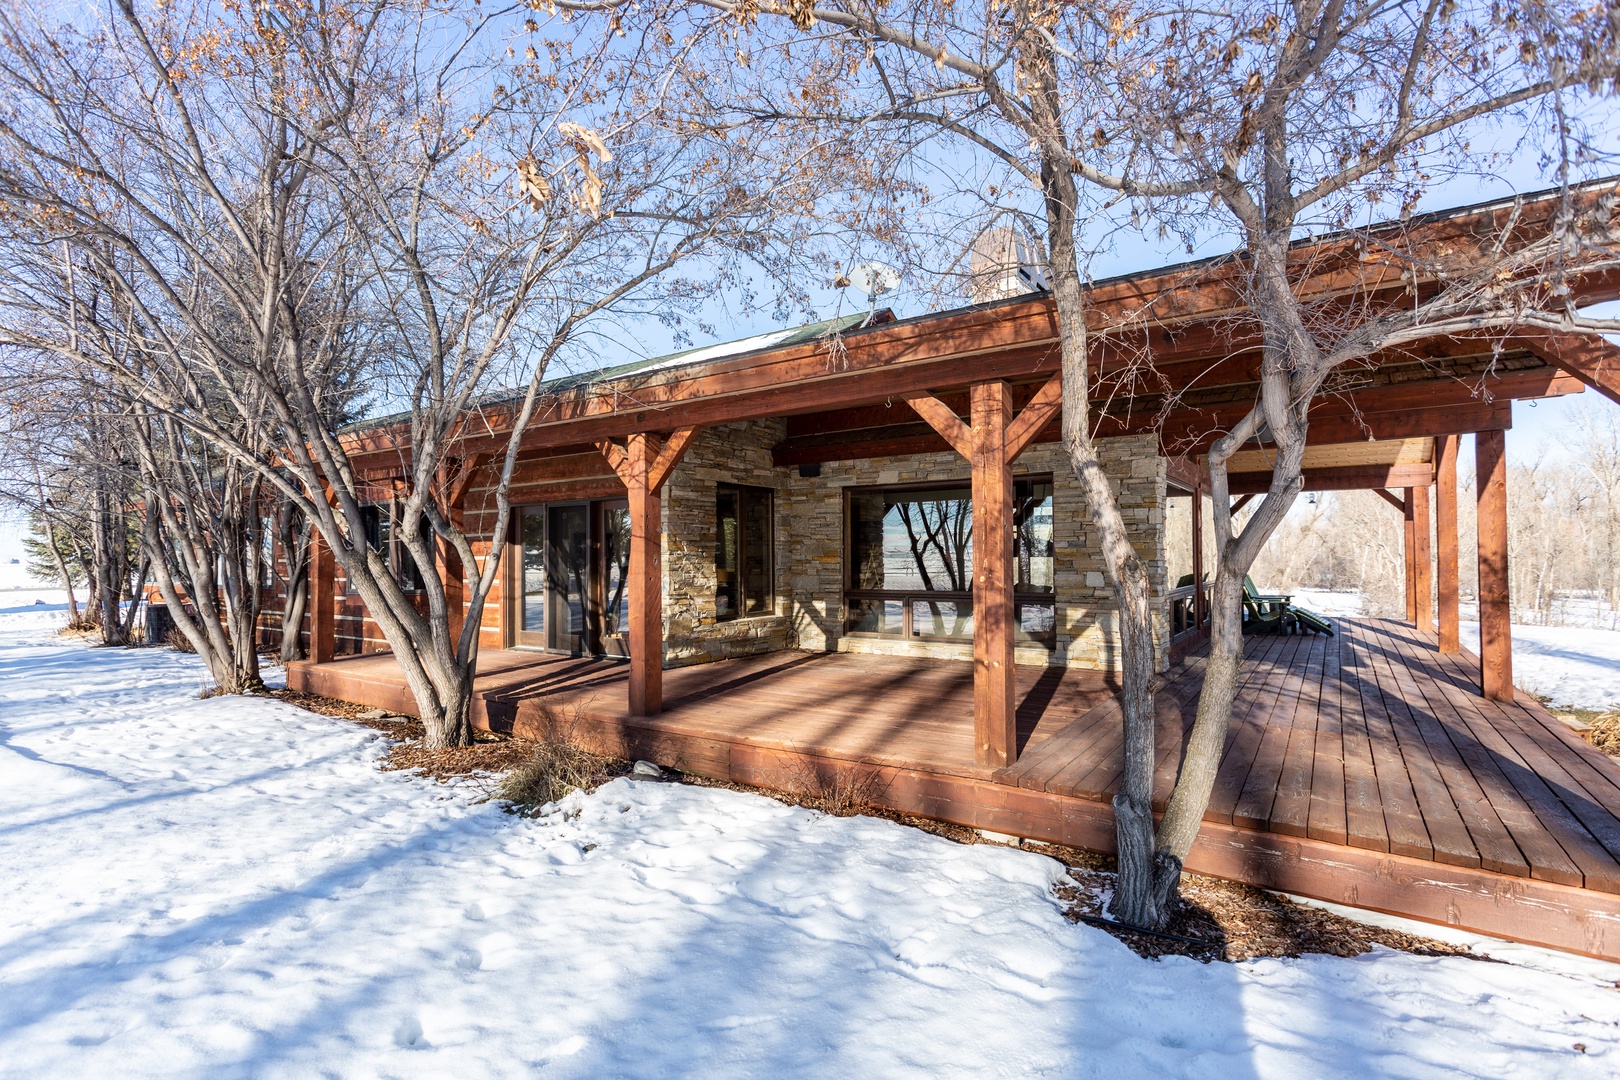 Bozeman Vacation Rentals, The Woodland Oasis - Immersed in nature, this place during Winter months gets a magical touch!